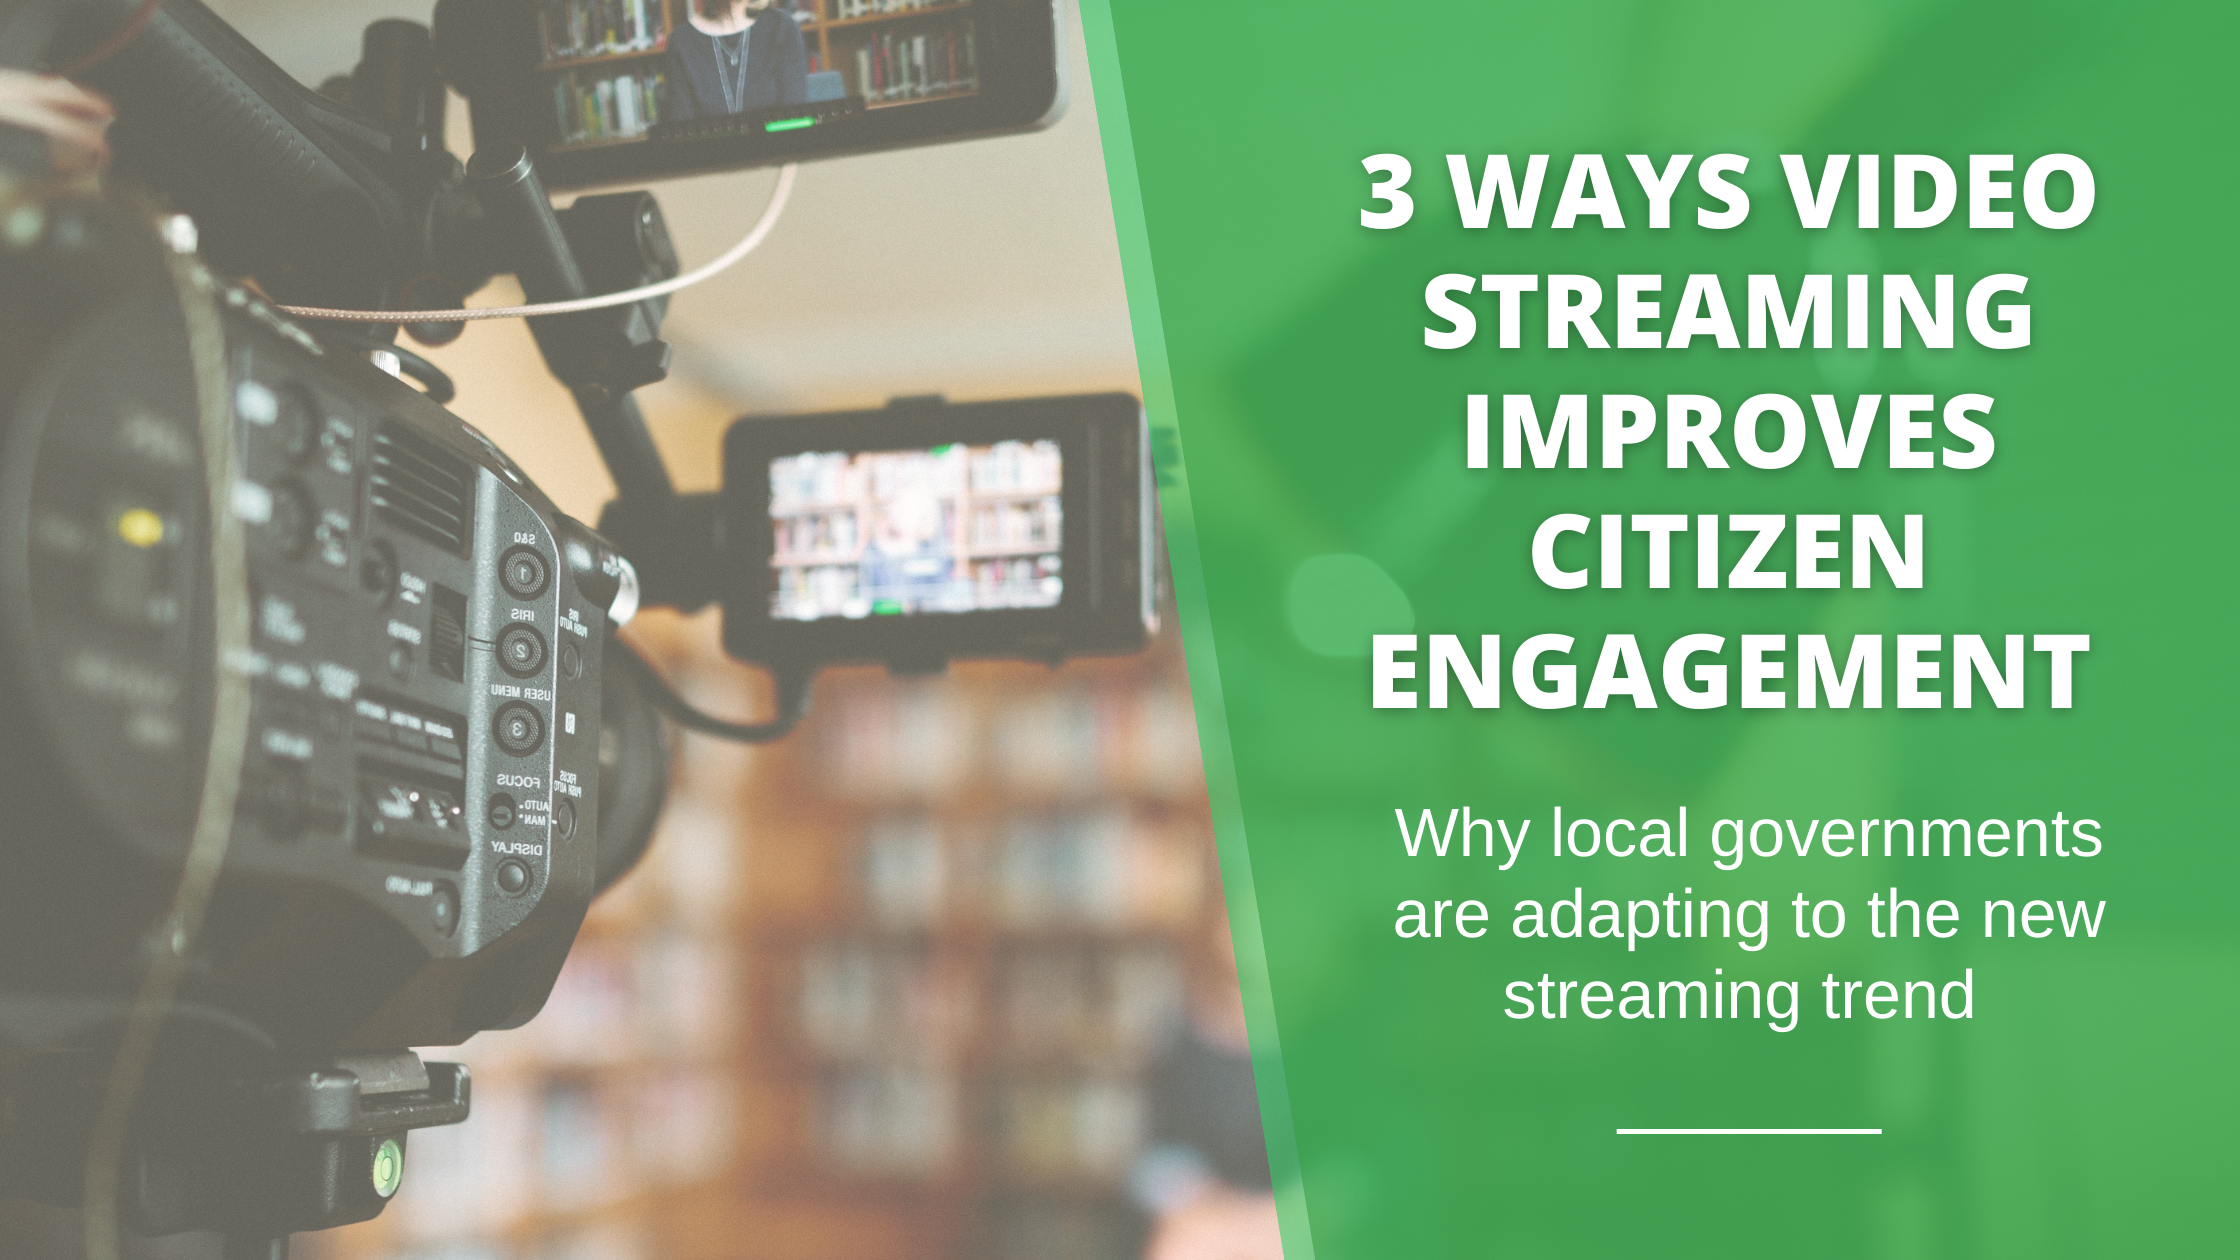 3 ways video streaming improves citizen engagement.